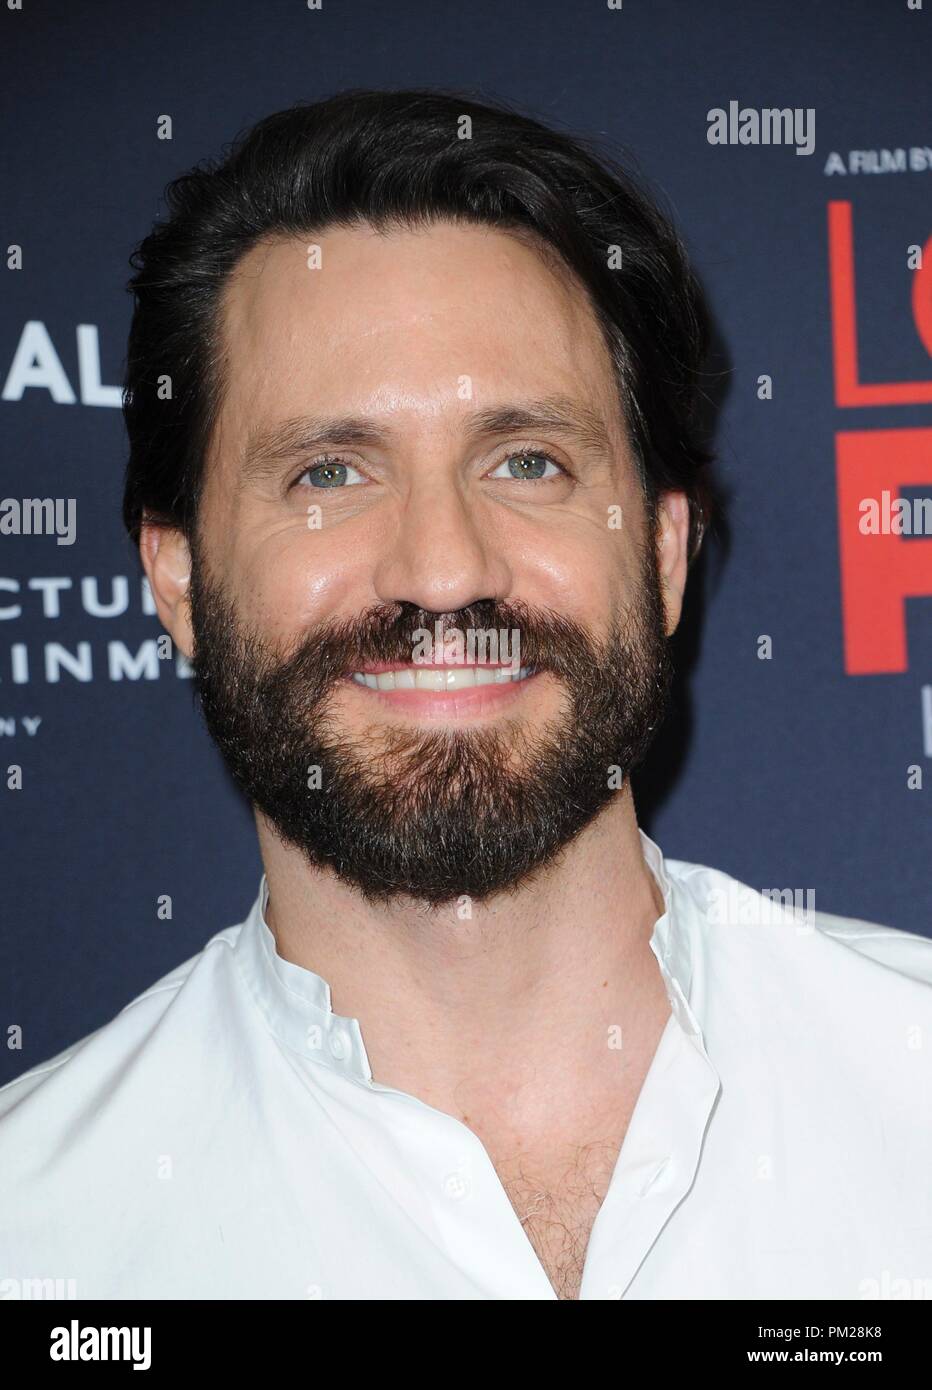 West Hollywood, CA. 16th Sep, 2018. Edgar Ramirez at arrivals for LOVING PABLO Premiere, The London Hotel West Hollywood, West Hollywood, CA September 16, 2018. Credit: Elizabeth Goodenough/Everett Collection/Alamy Live News Stock Photo